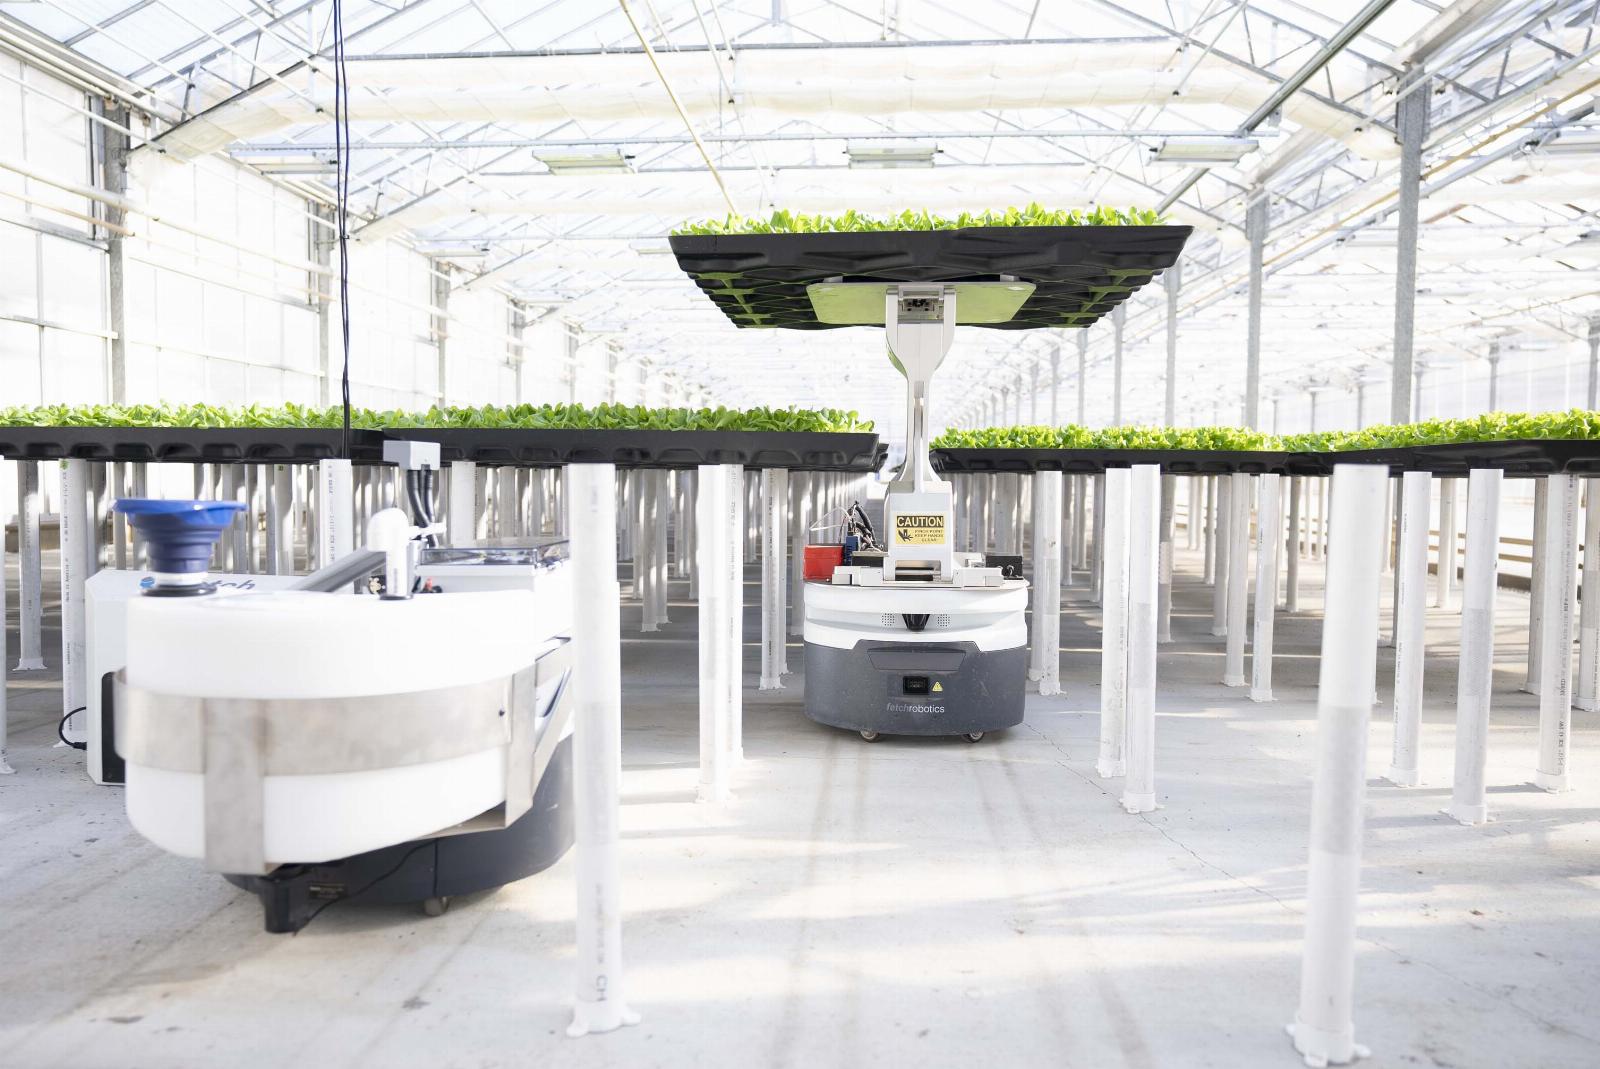 How robotics and AI helped Hippo Harvest land $21M to grow lettuce